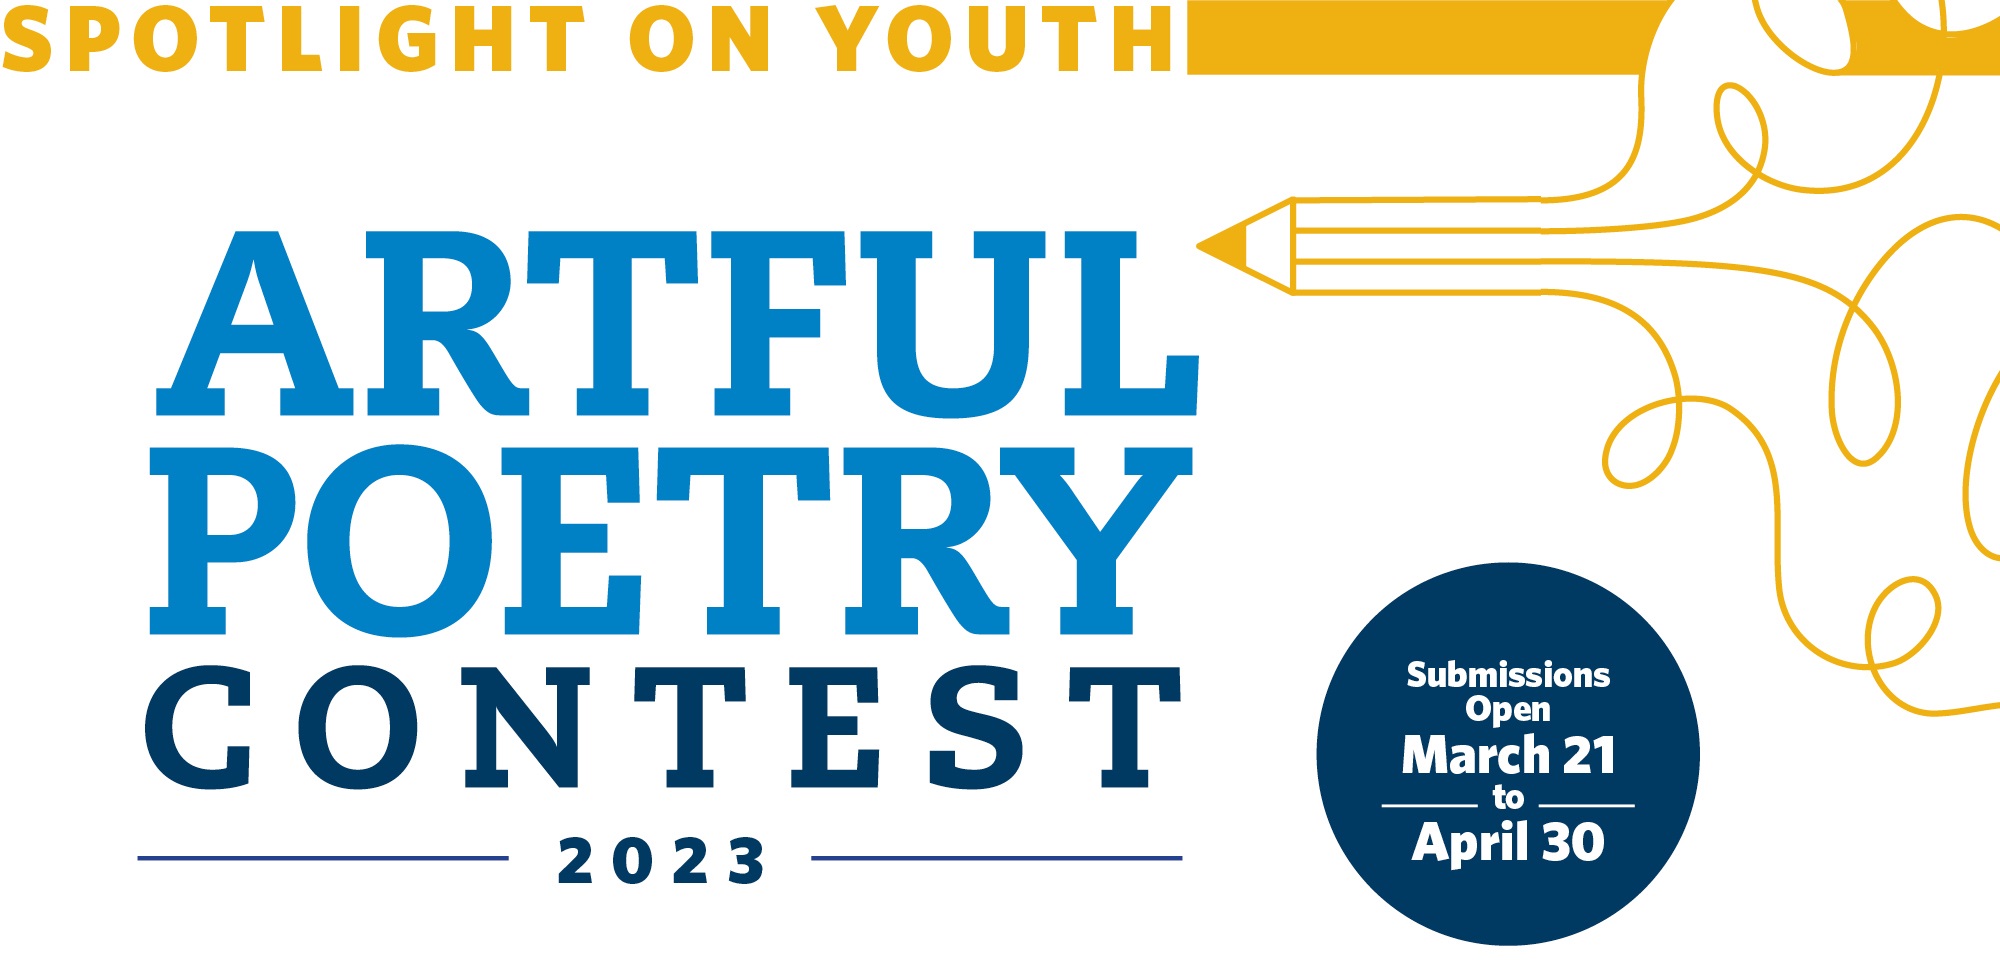 Artful Poetry Contest Kauffman Center for the Performing Arts